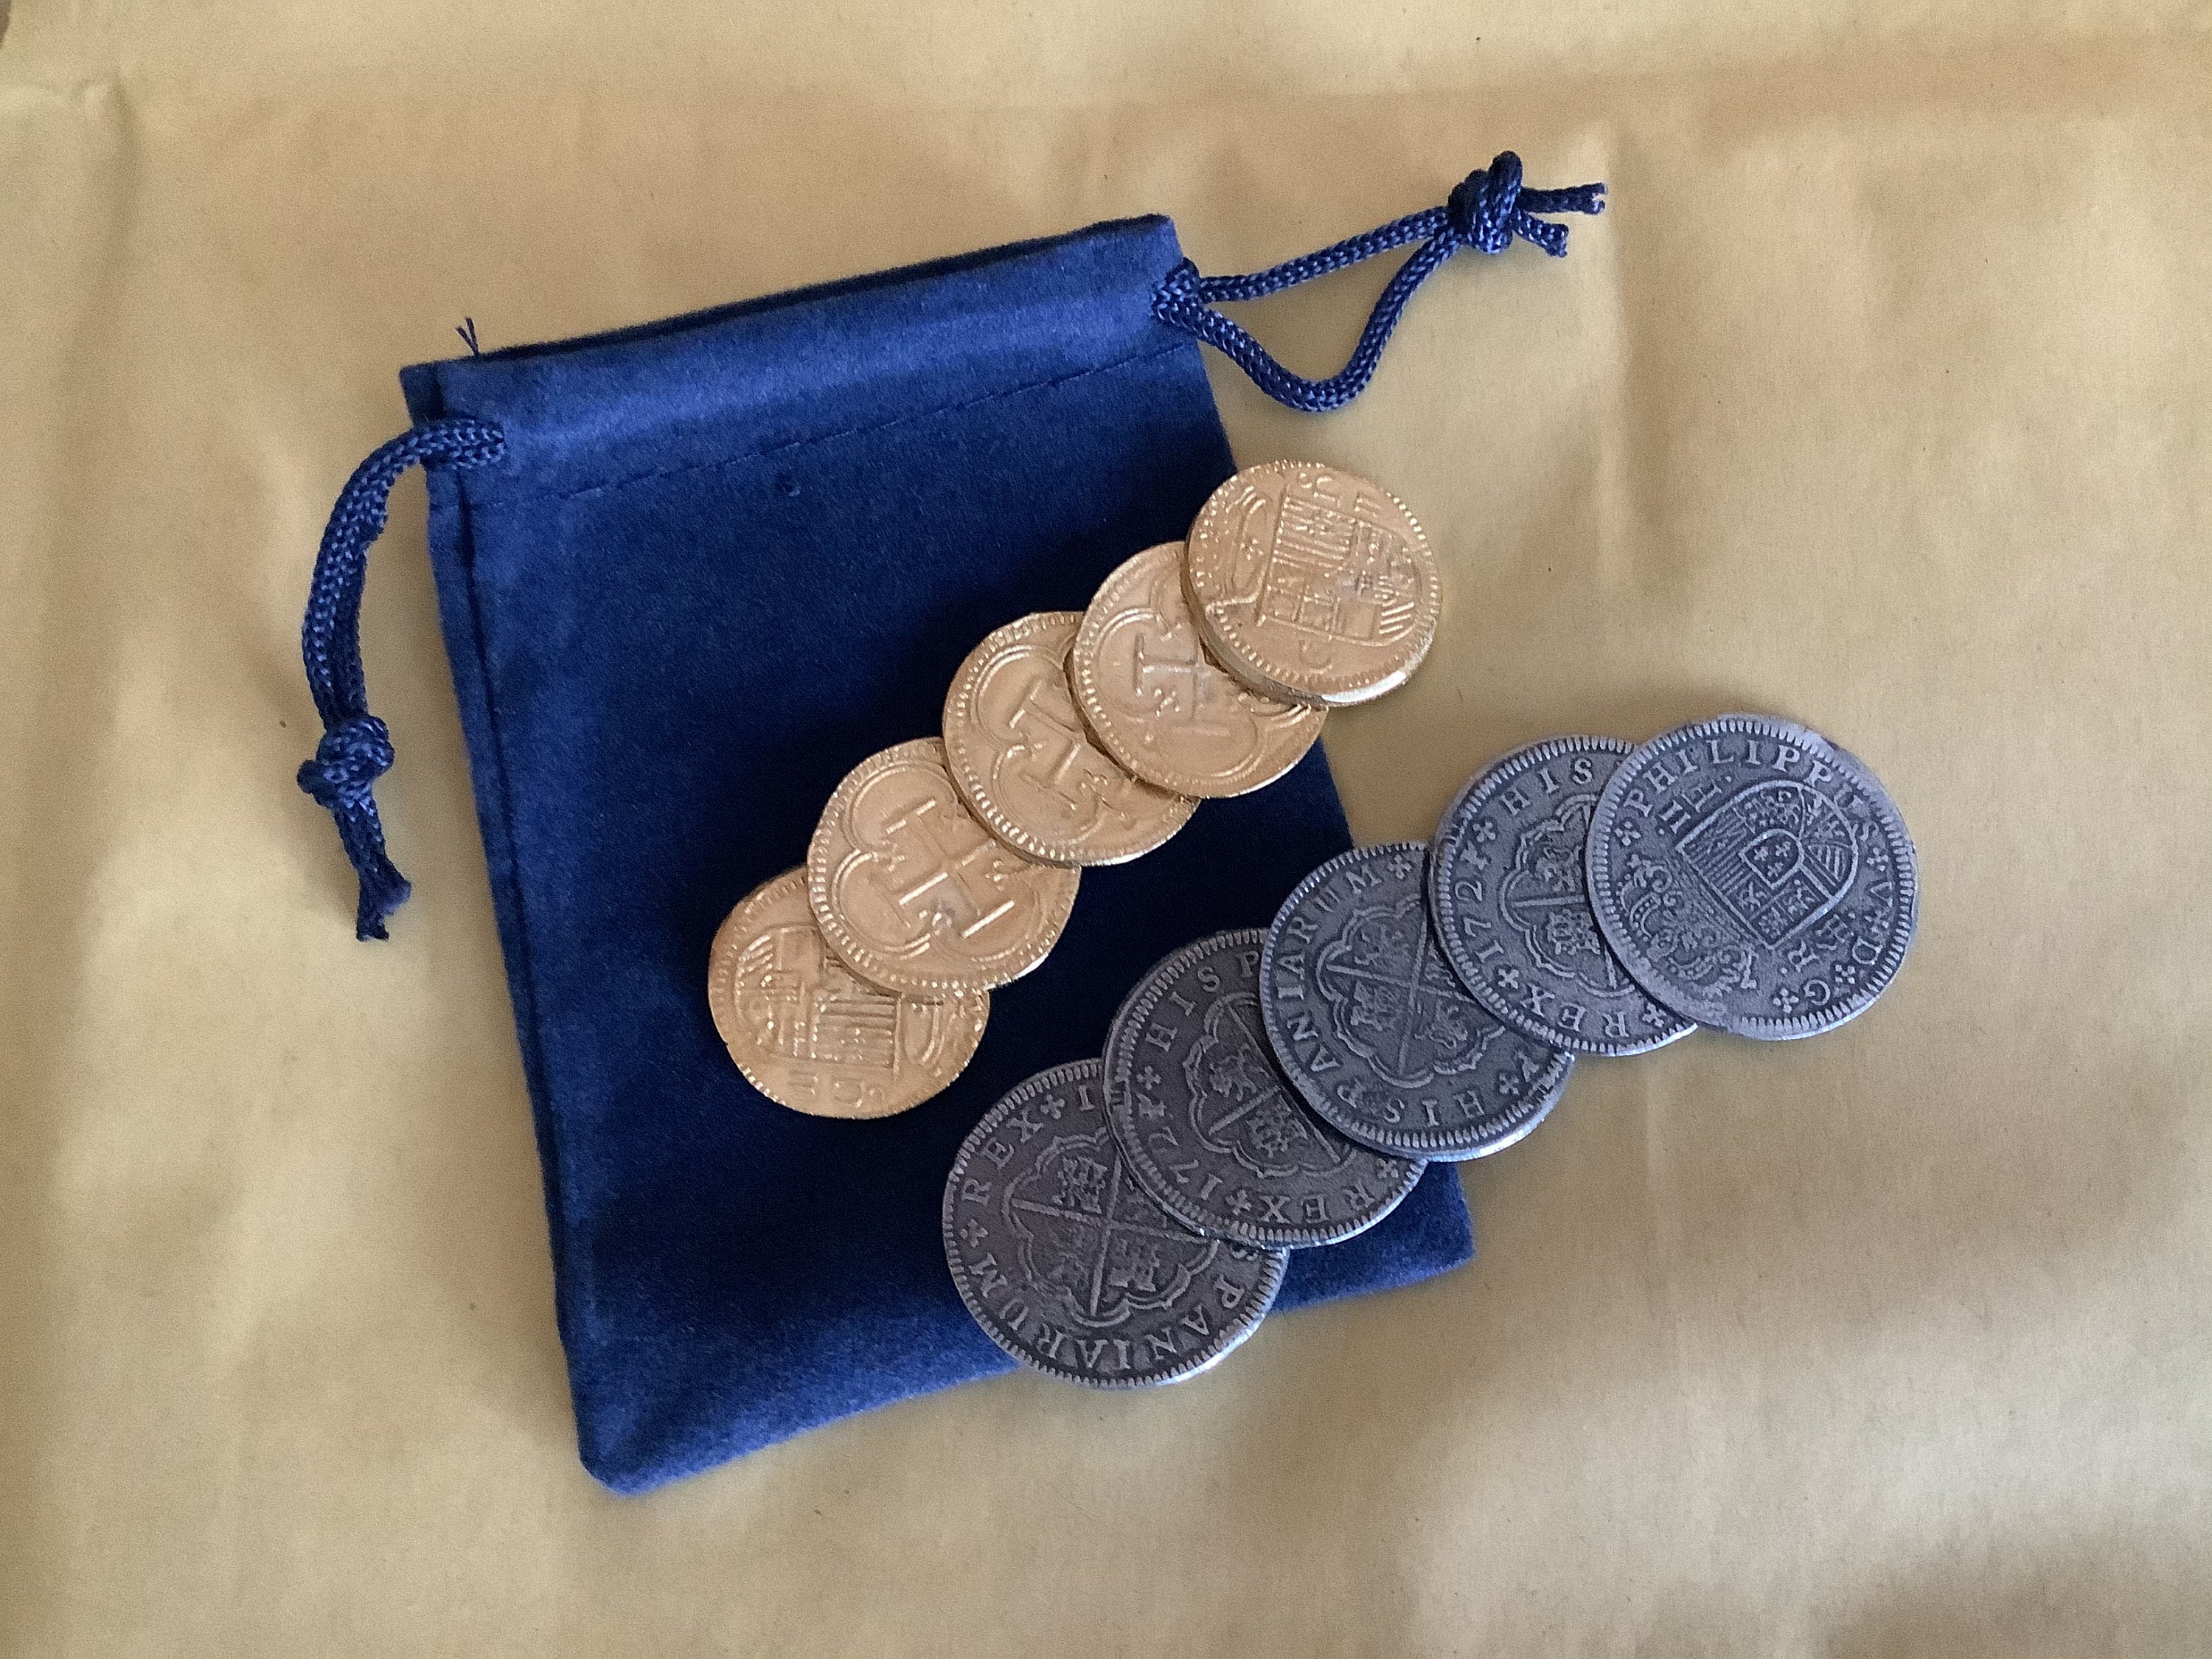 5 Gold and 5 Silver Pirate Coins Pirate Treasure Pouch Set 15 Pcs Collection 